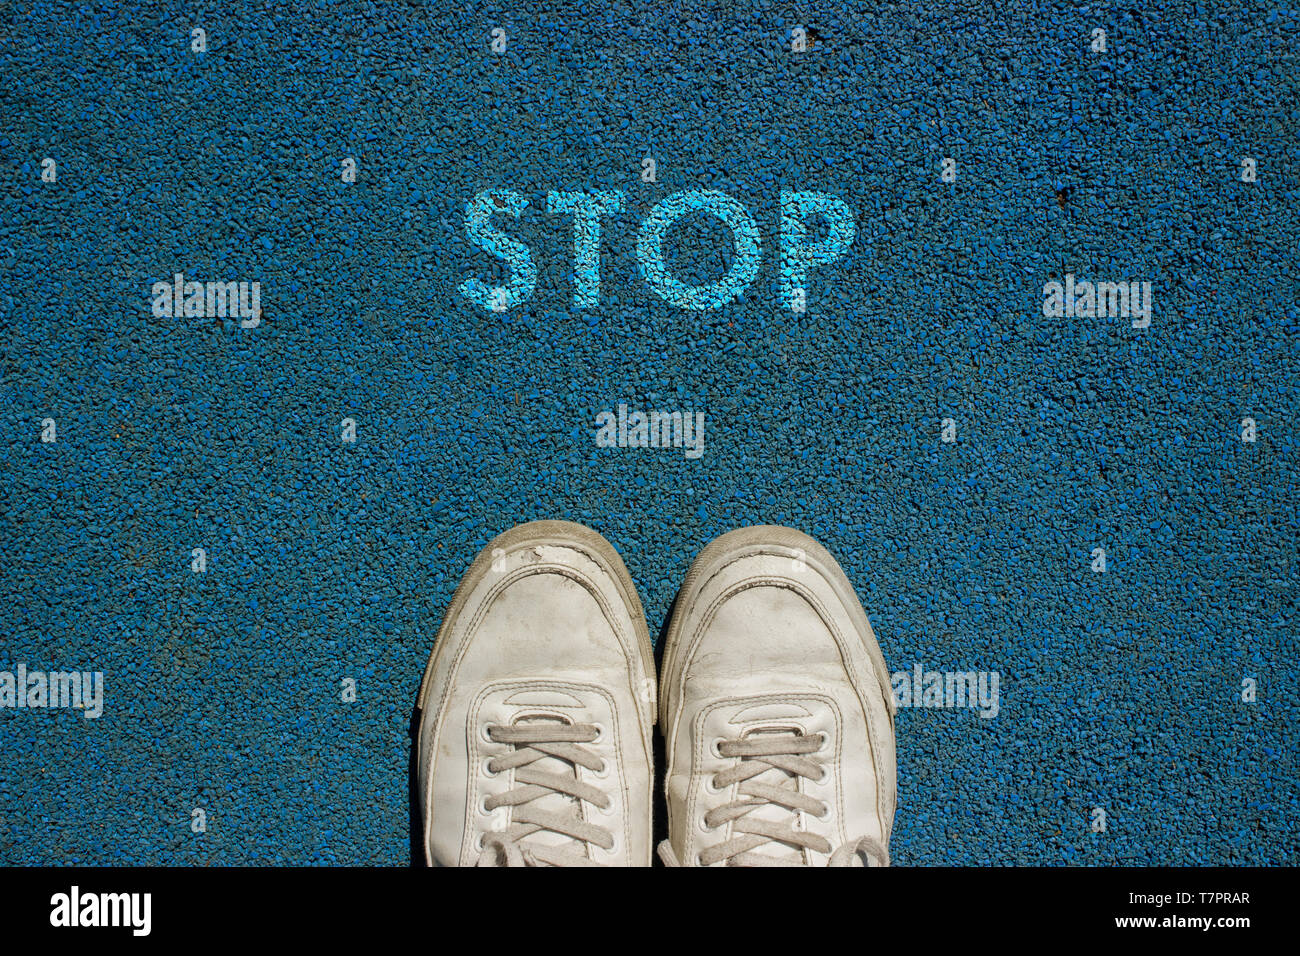 New life concept, Sport shoes and the word STOP written on blue walk way ground, Motivational slogan. Stock Photo